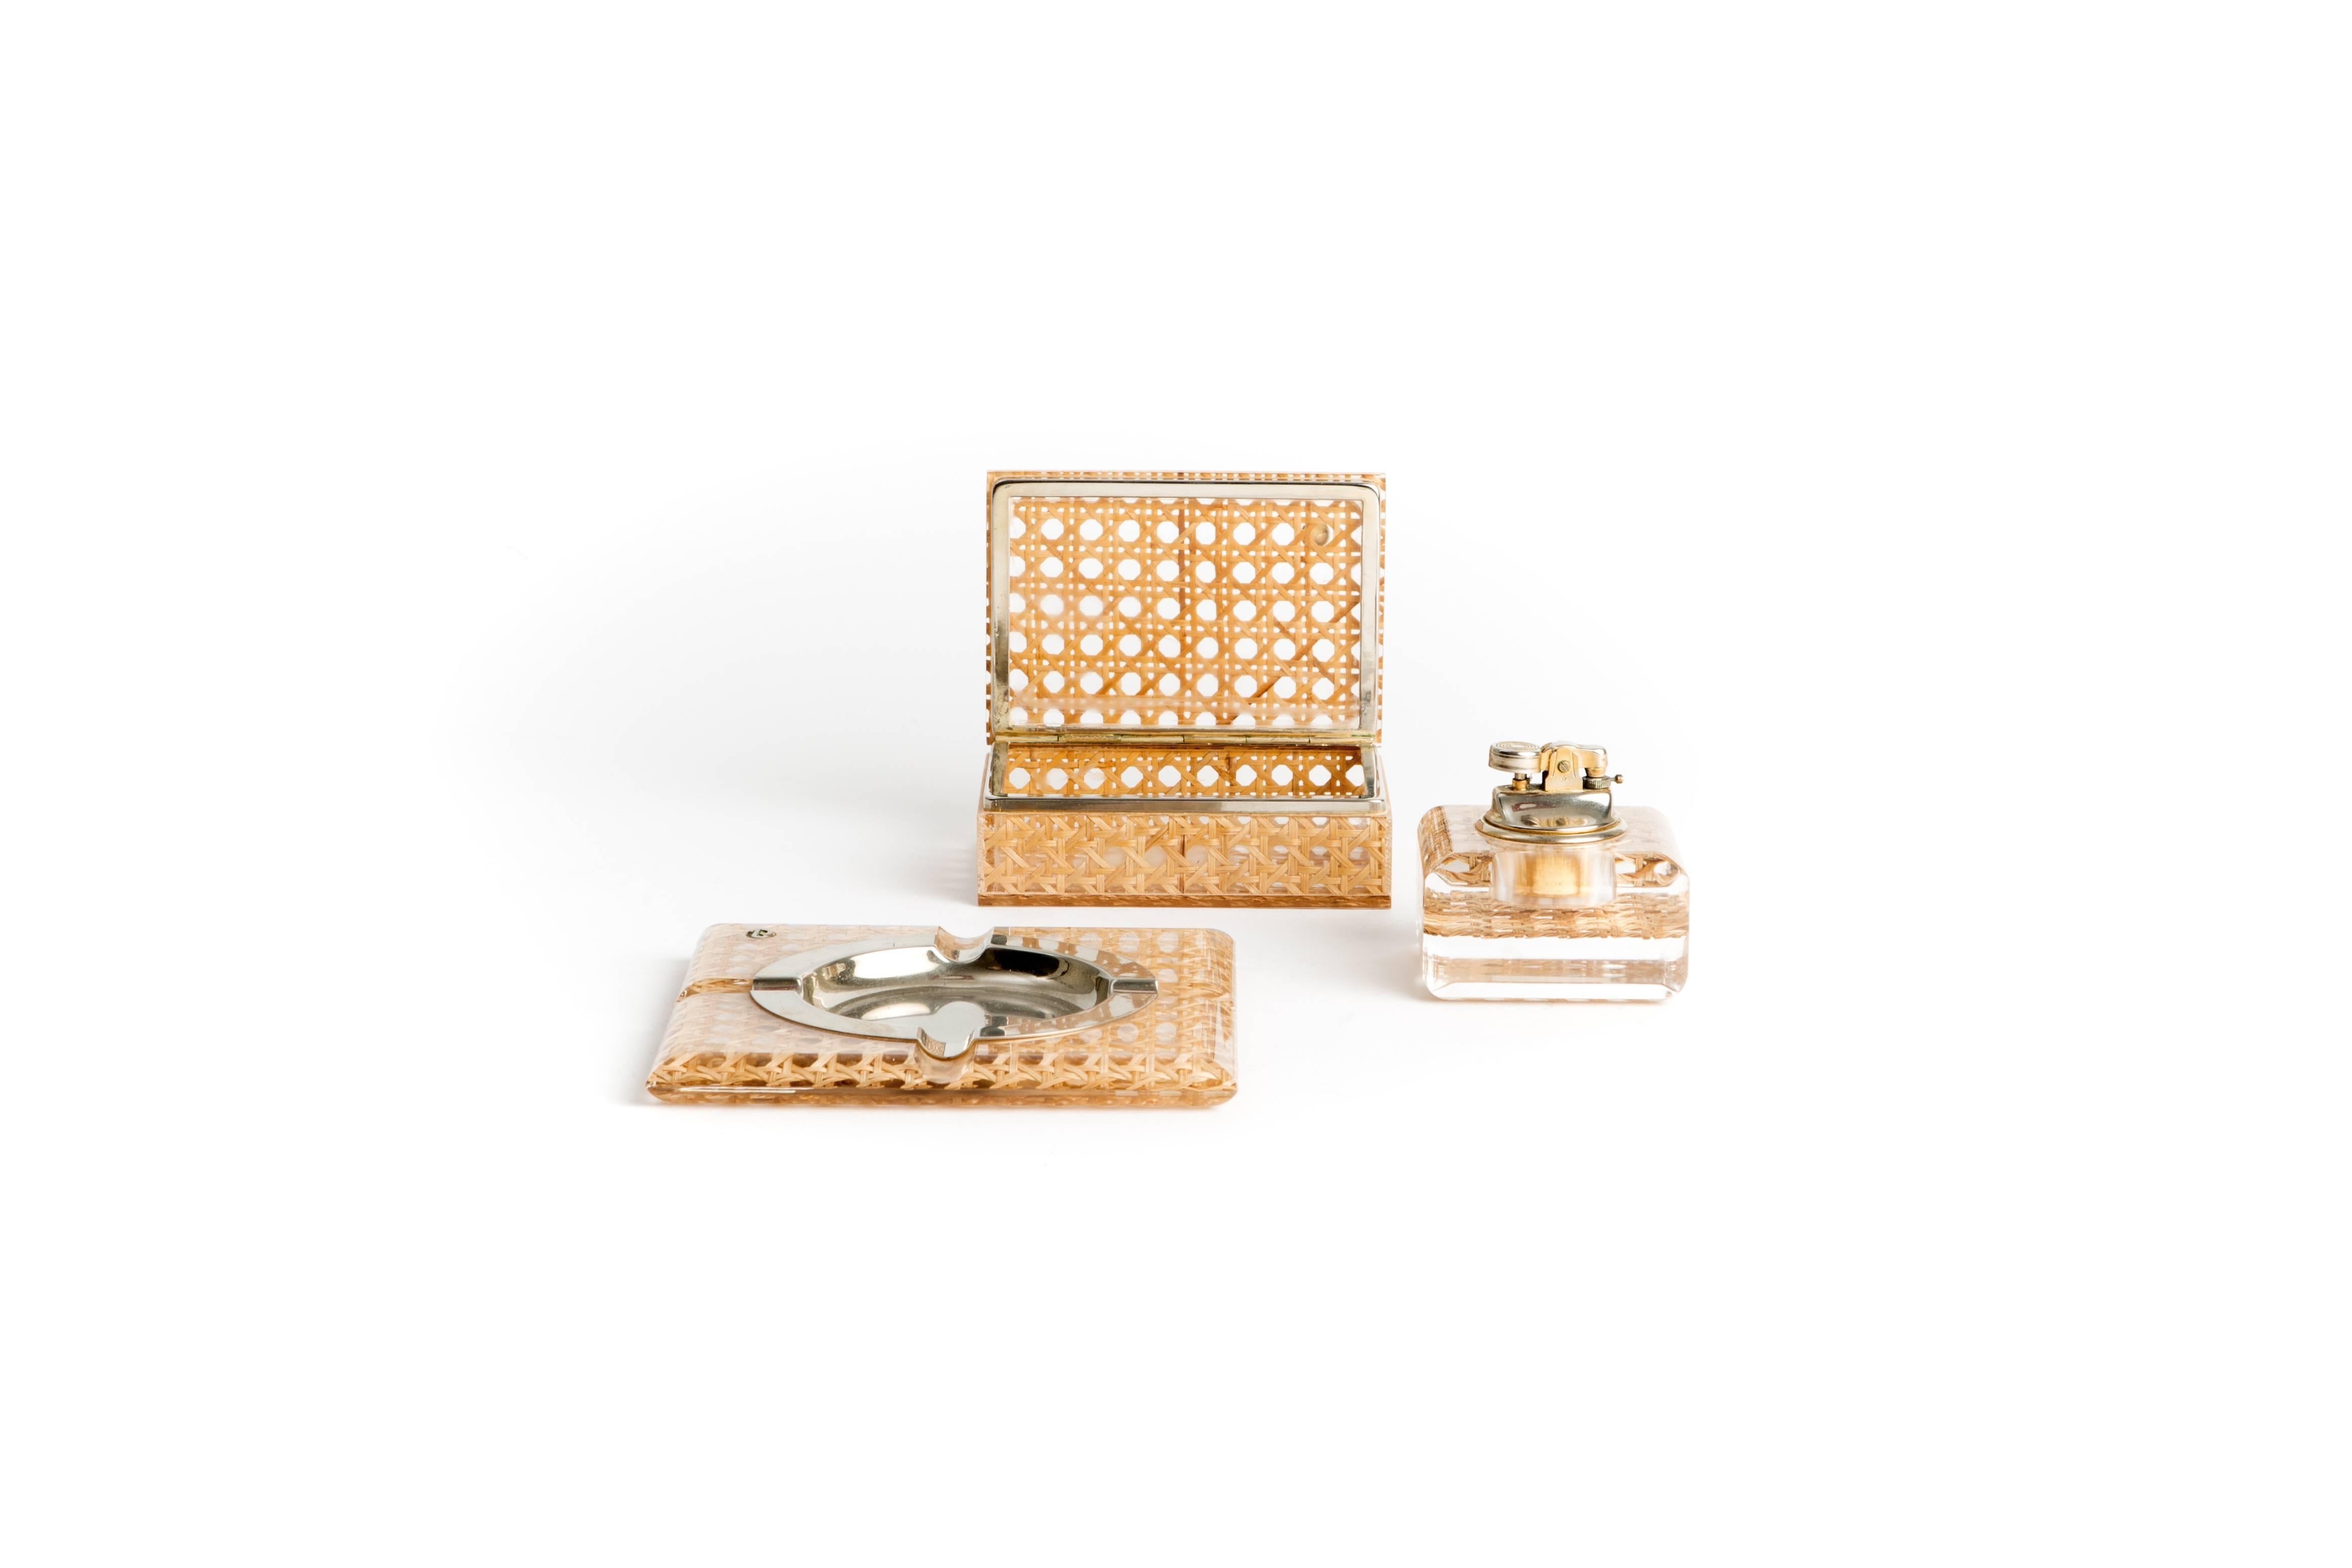 Lucite and wicker smoker set consisting of an ashtray, a cigarette box, and a lighter. Both lighter and ashtray have maker's stamp on the bottom right corner. The lighter has a sticker reading 'designed by Coal for Loreto (An) Italy'

Ashtray